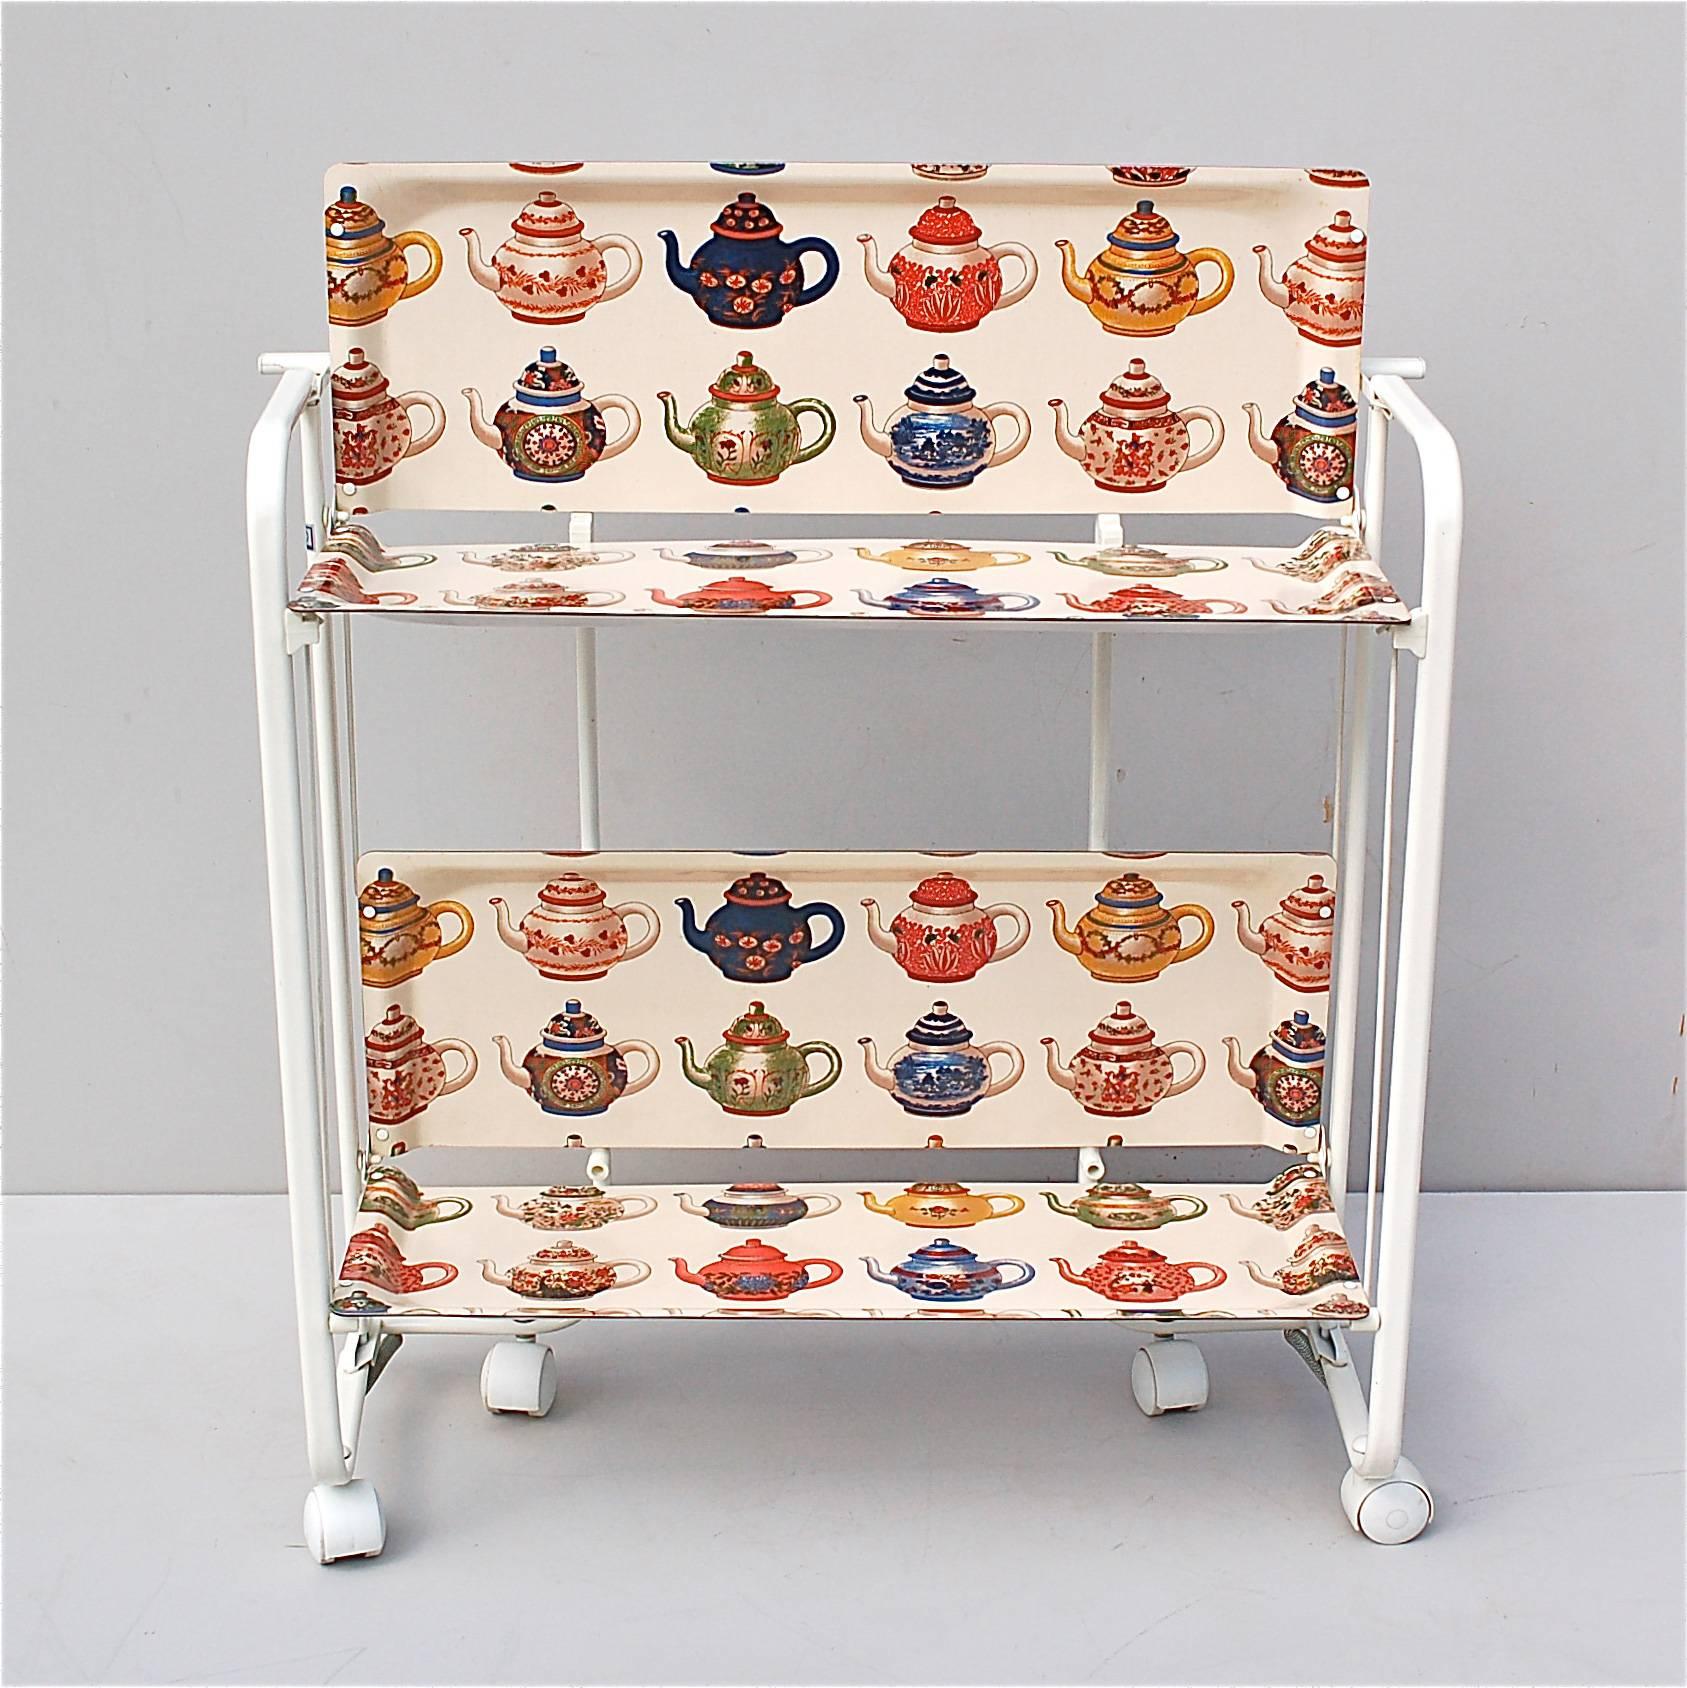 A wonderfully original interpretation of a 1950s drinks or tea trolley on wheels. Made from a white metal frame with two tier formica trays decorated with colorful pattern of tea pots which have a hint of Pierre Frey about them. The trolley can be